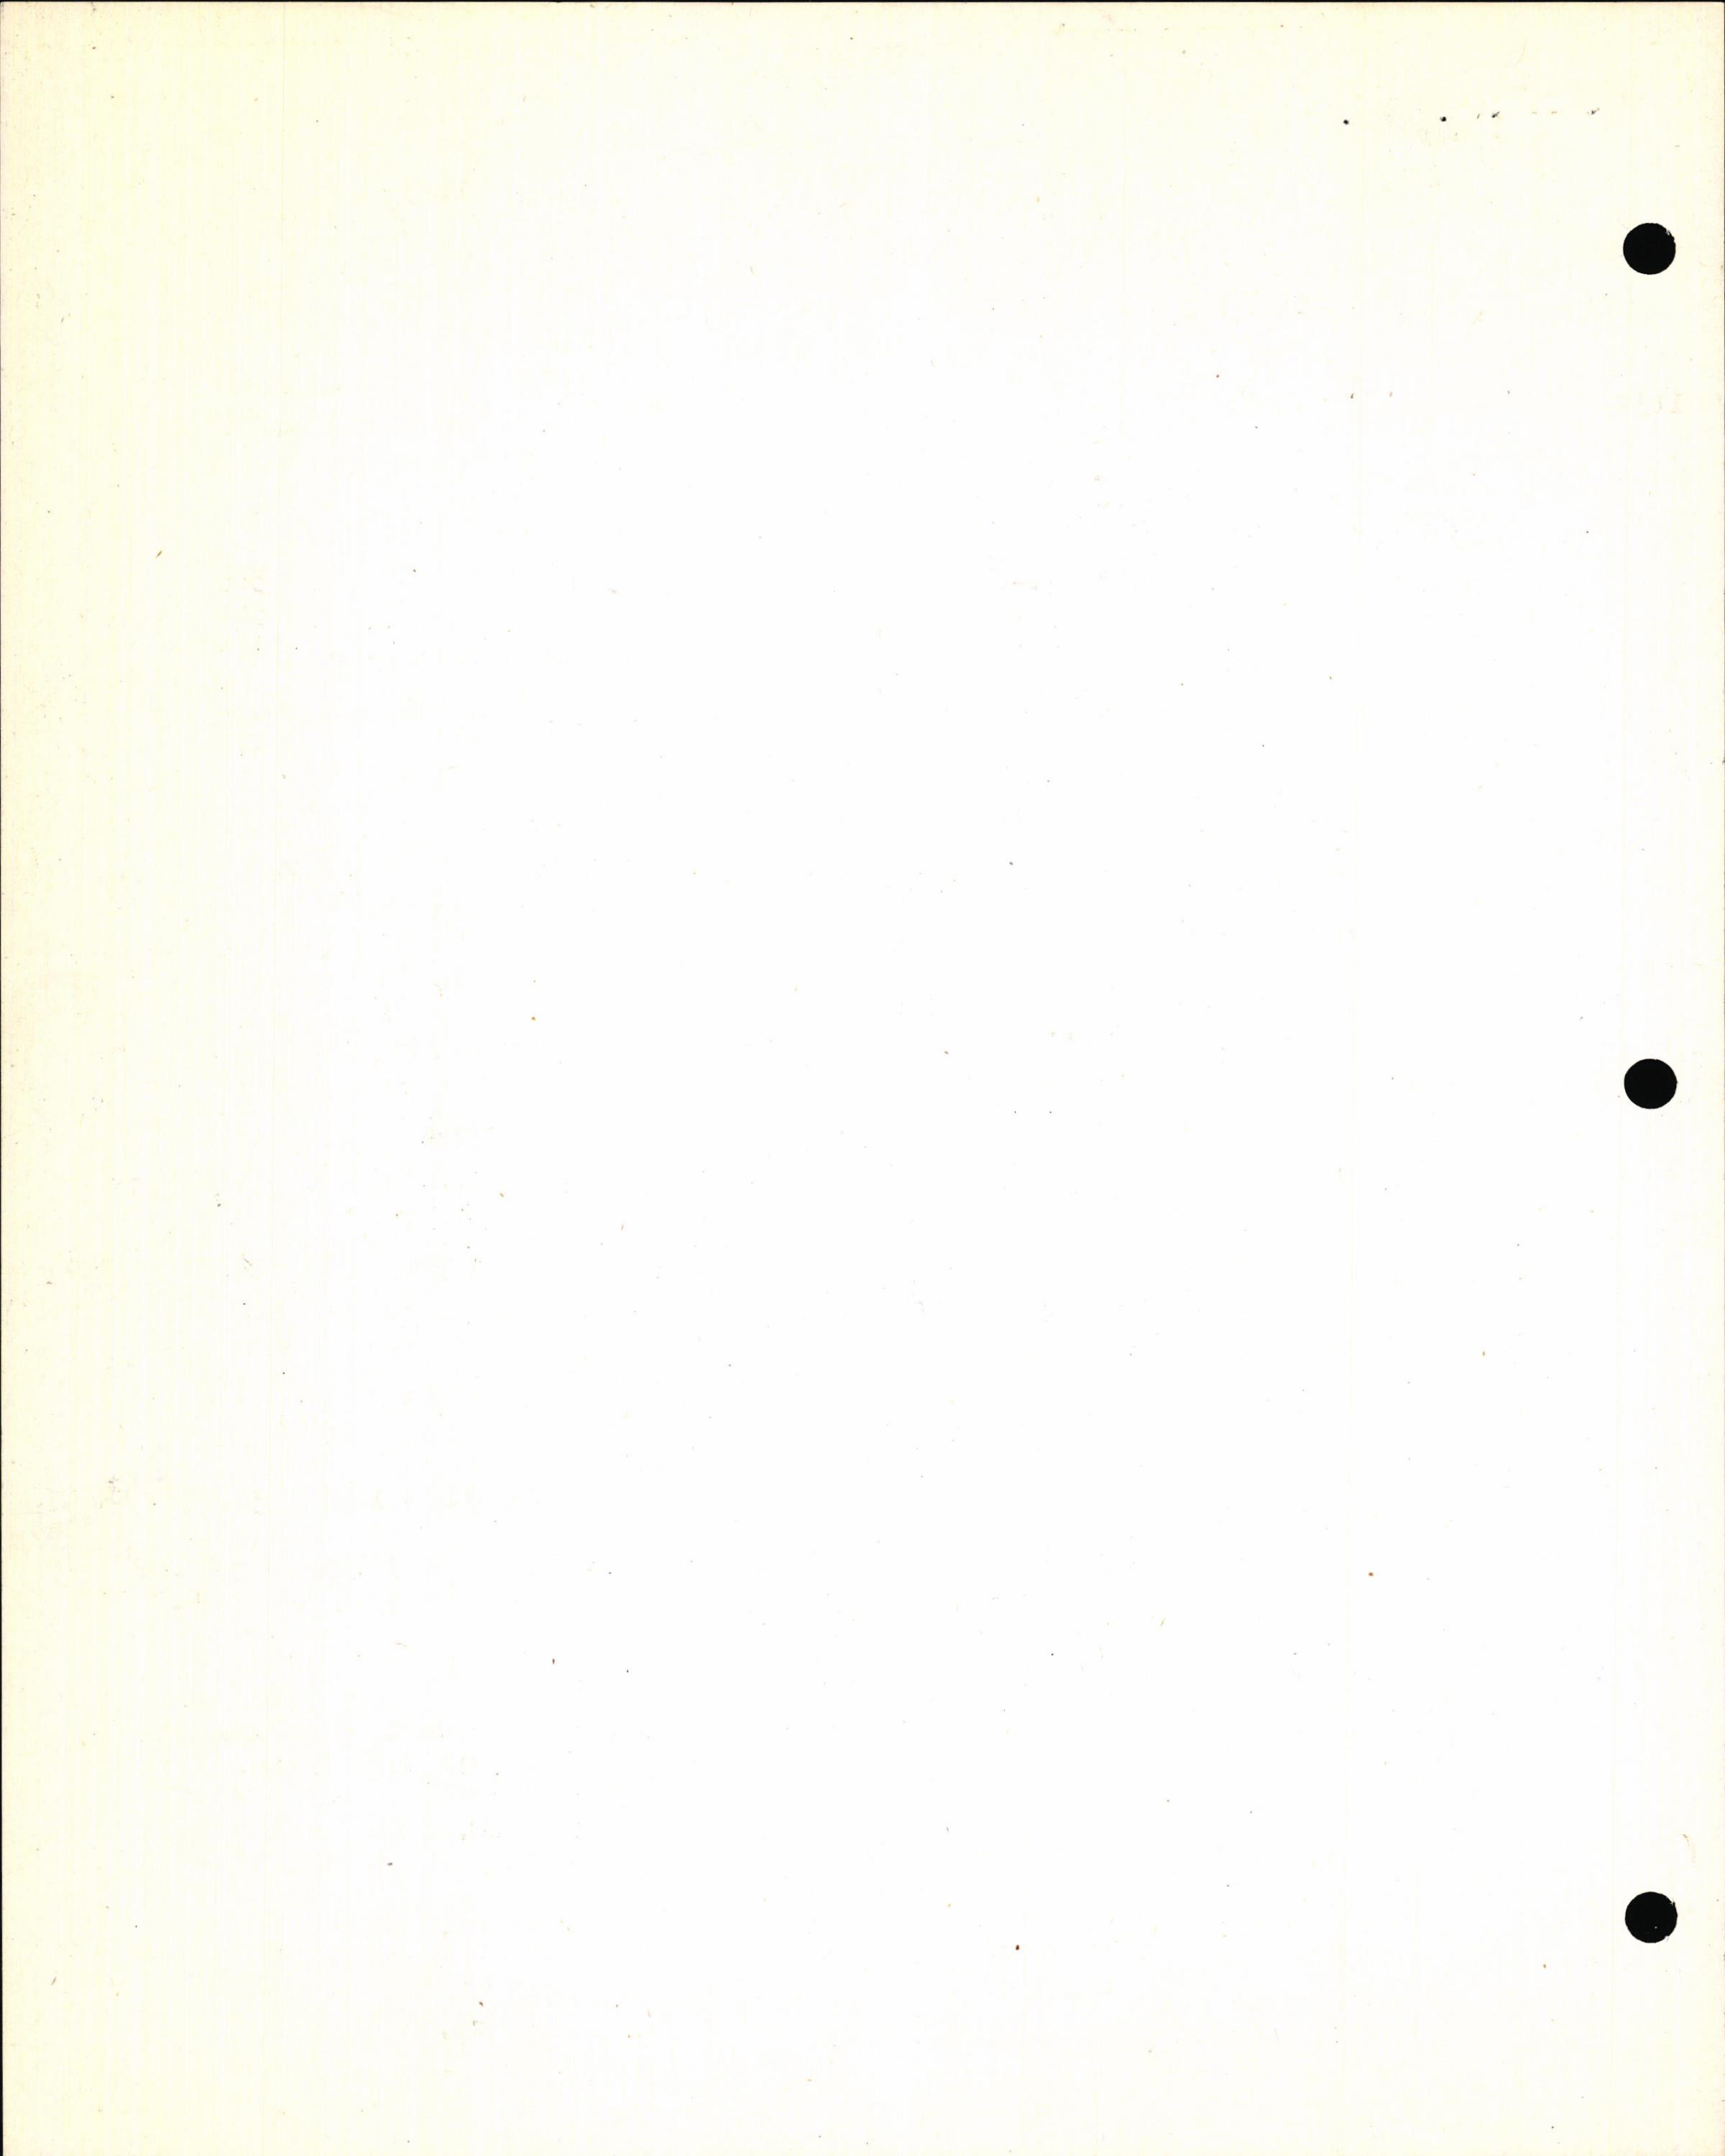 Sample page 6 from AirCorps Library document: Technical Information for Serial Number 1183